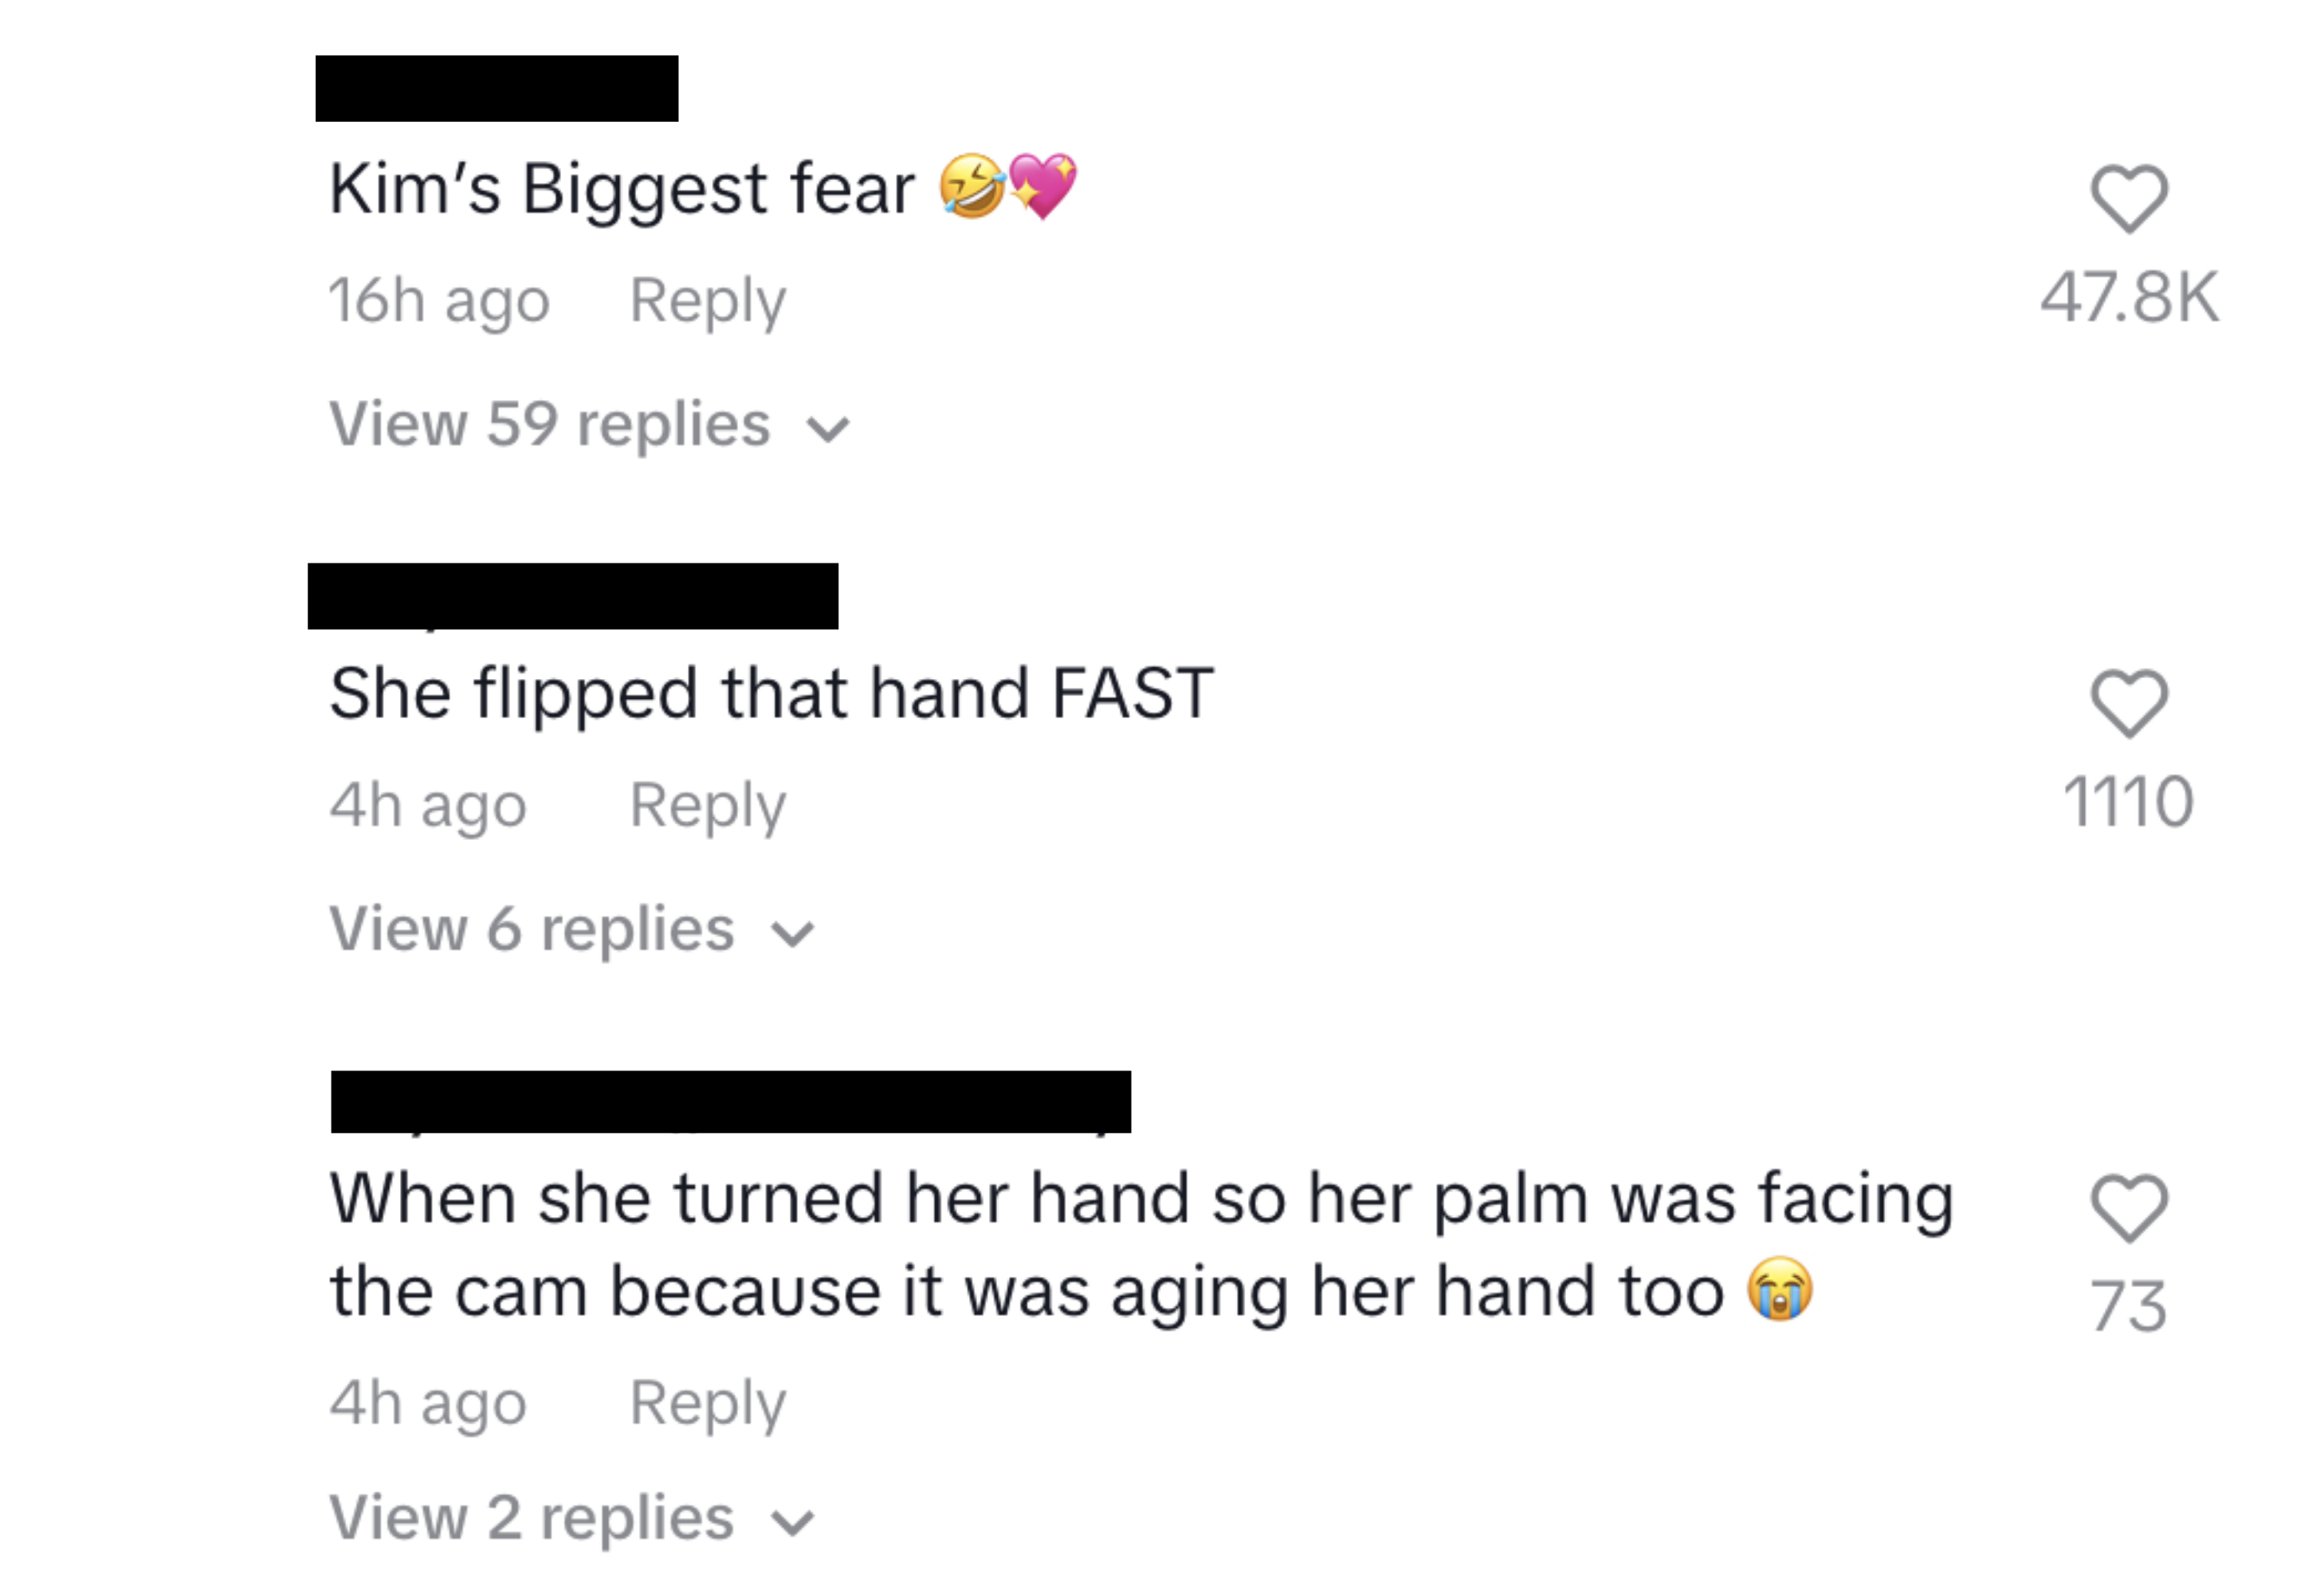 &quot;She flipped that hand FAST&quot;